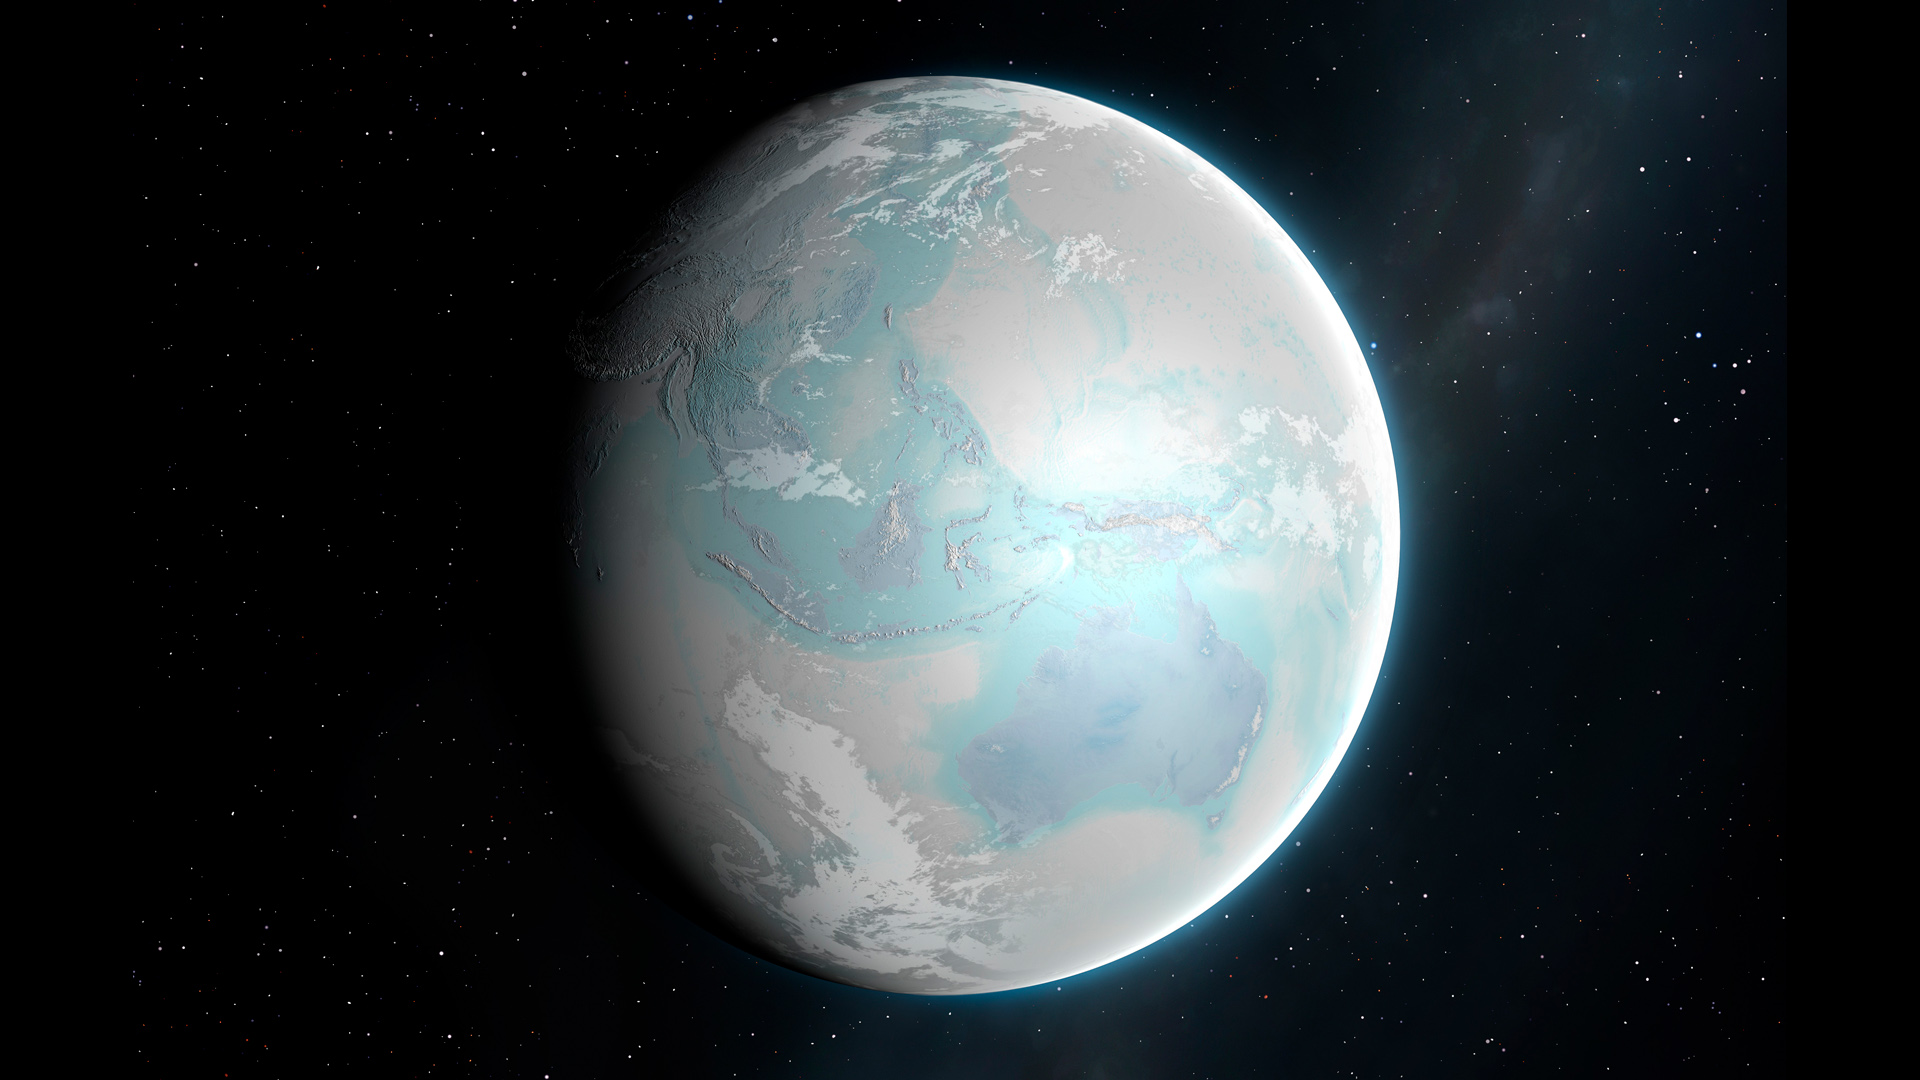 During ice ages, Earth could turn into an inhospitable snowball.